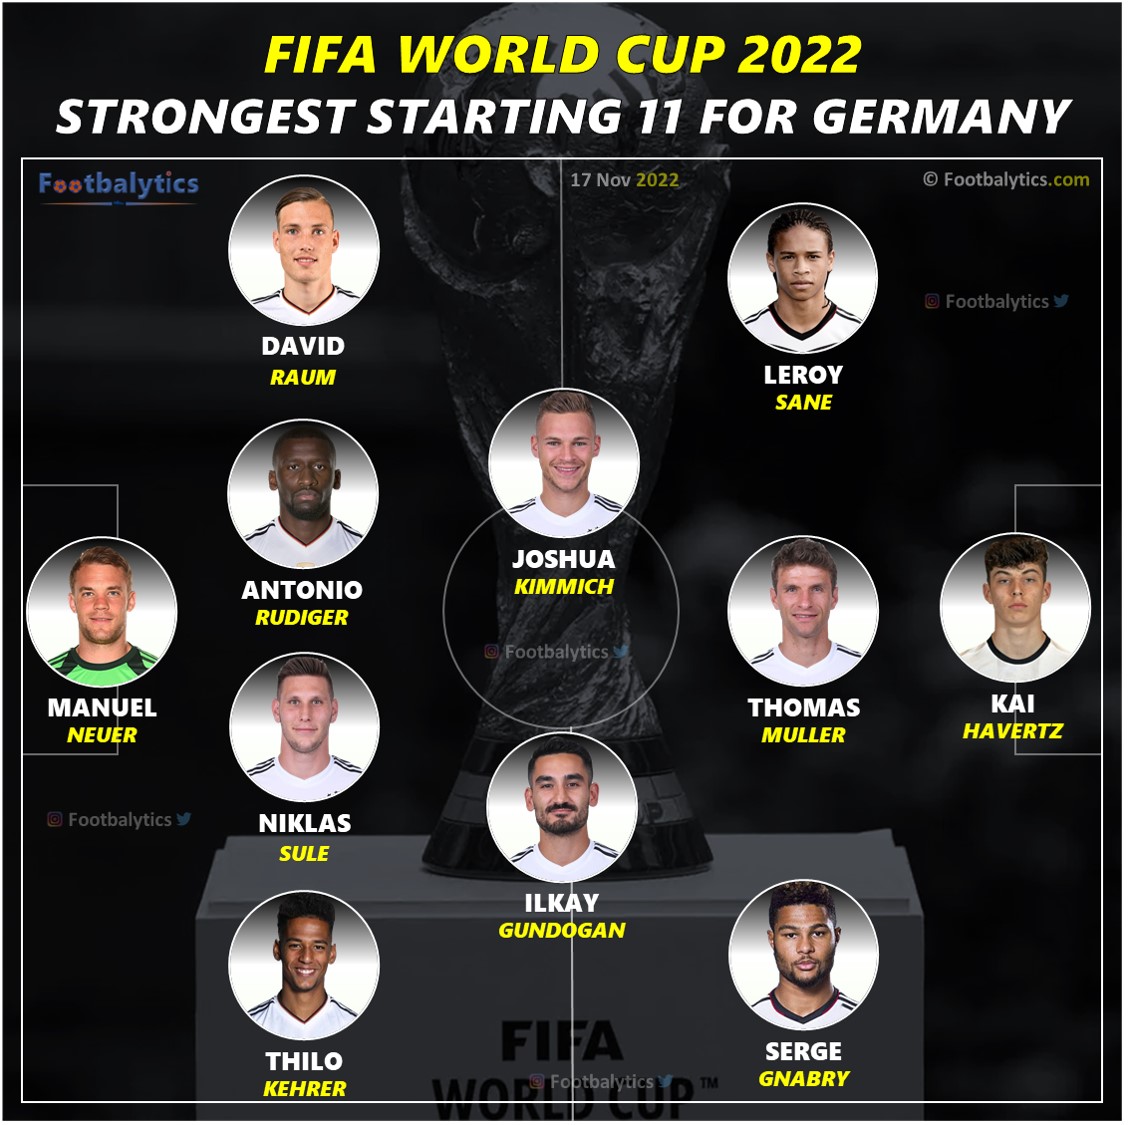 fifa world cup 2022 germany best strongest starting 11 footbalytics